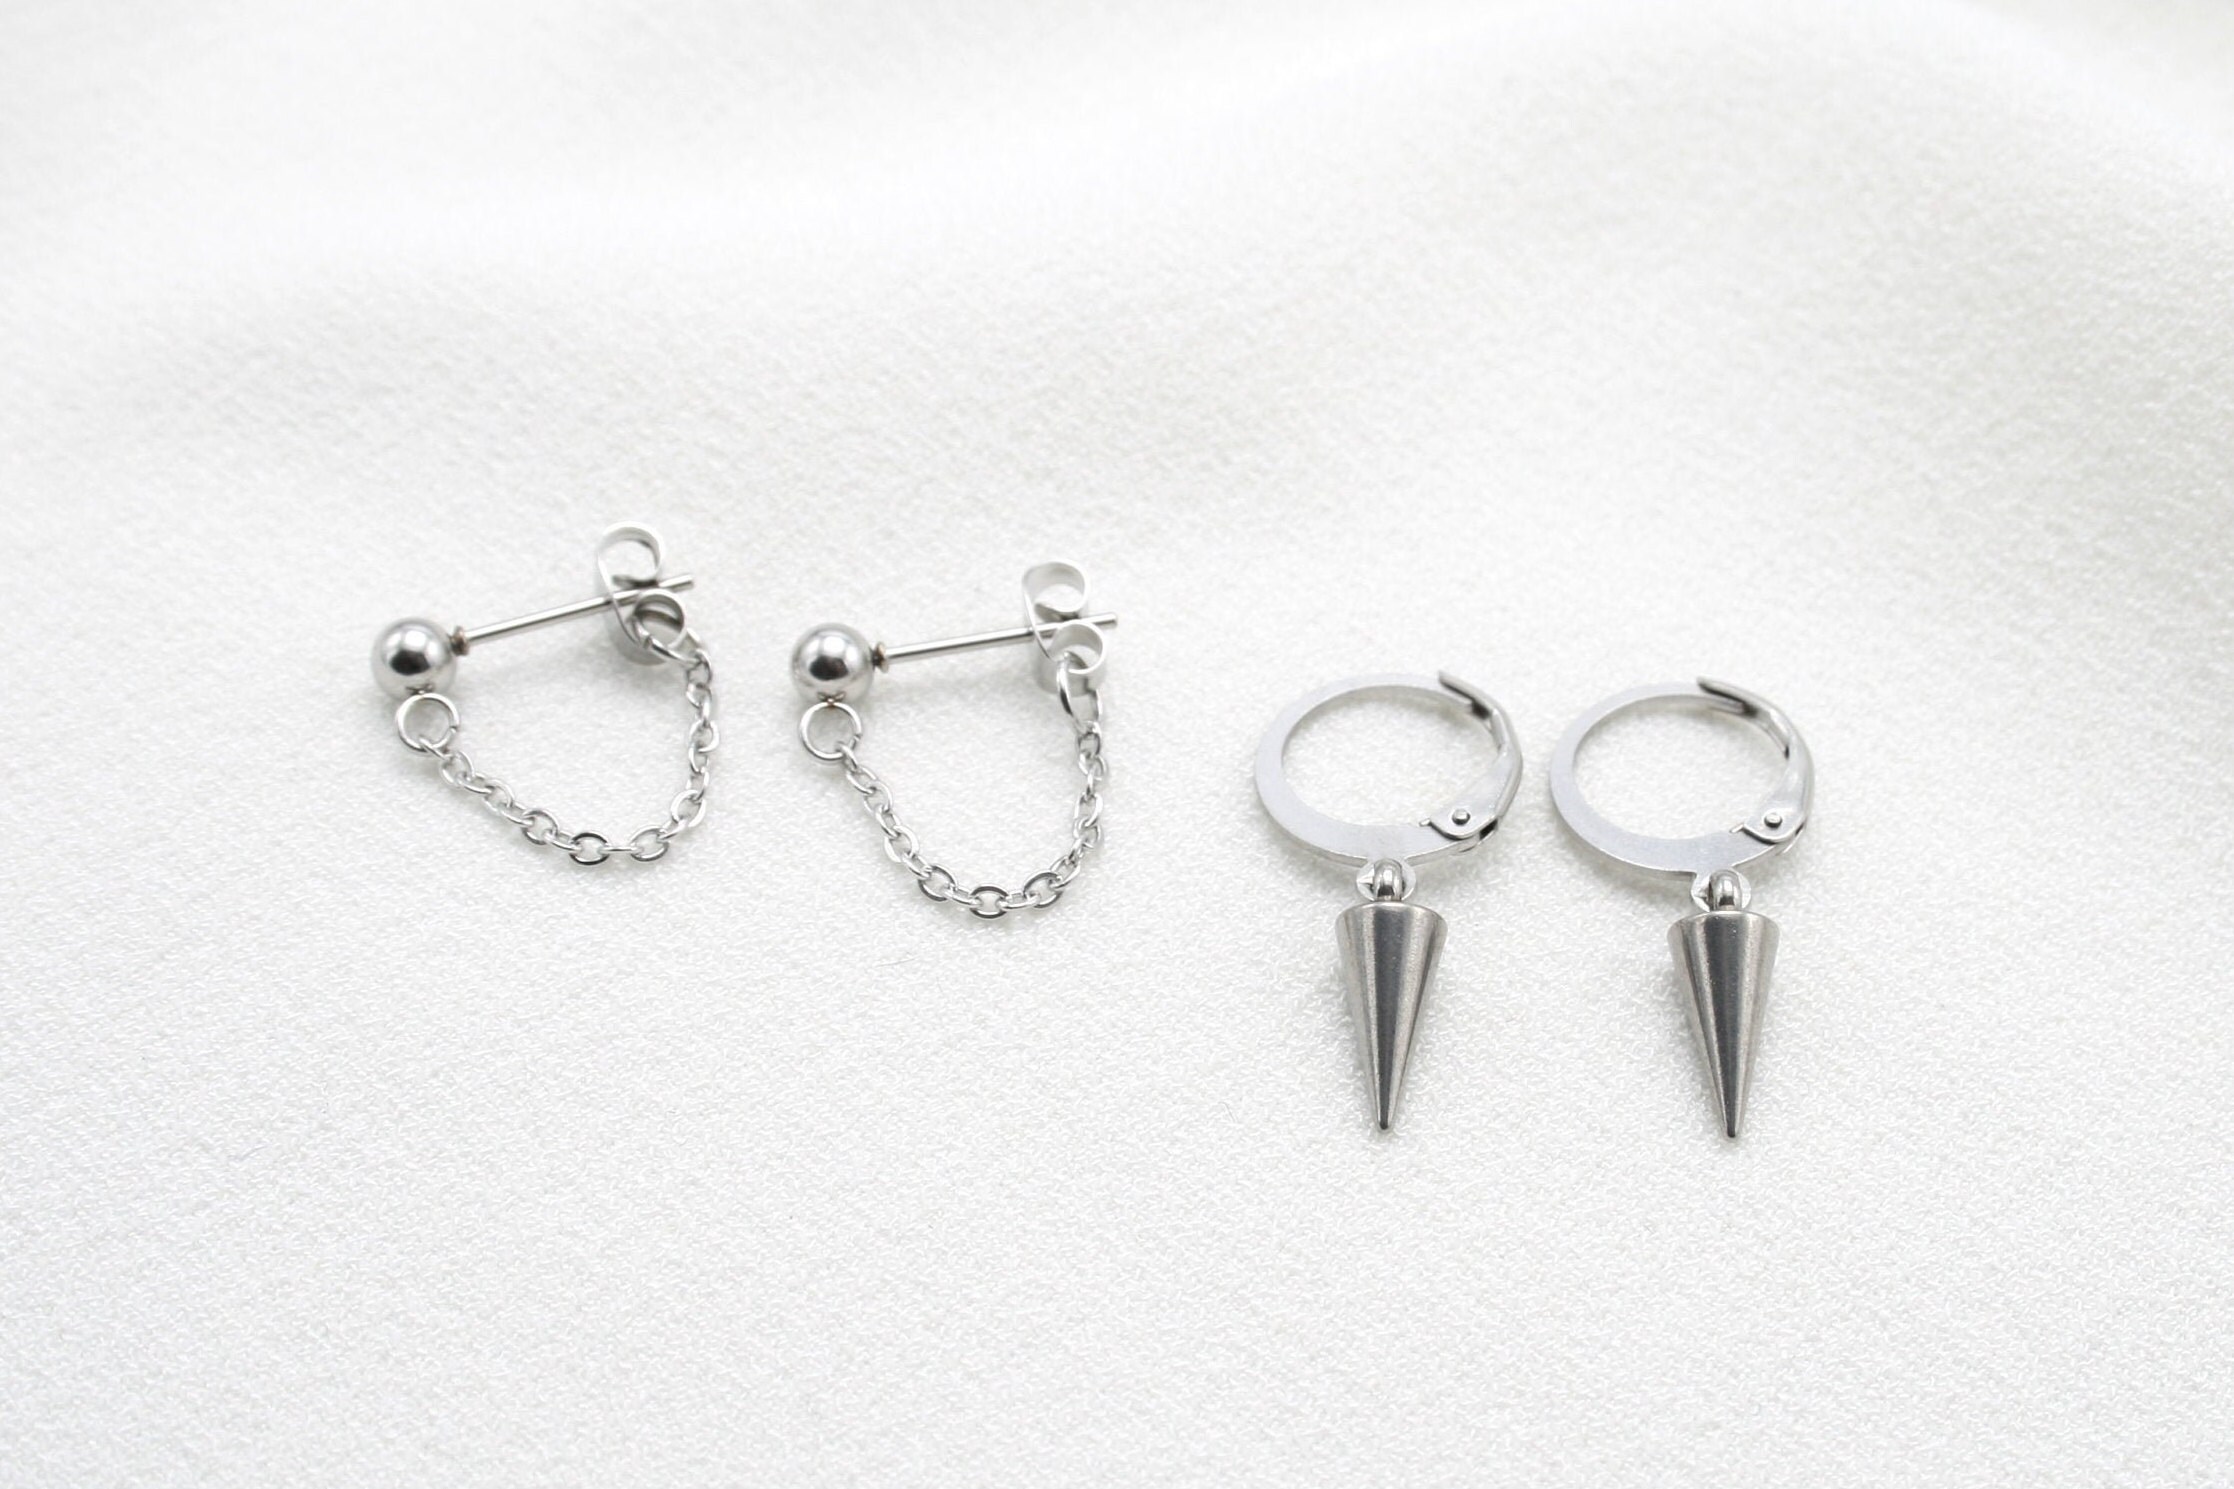 Surgical Steel Earrings Set of 2 Pairs Silver Spike - Etsy